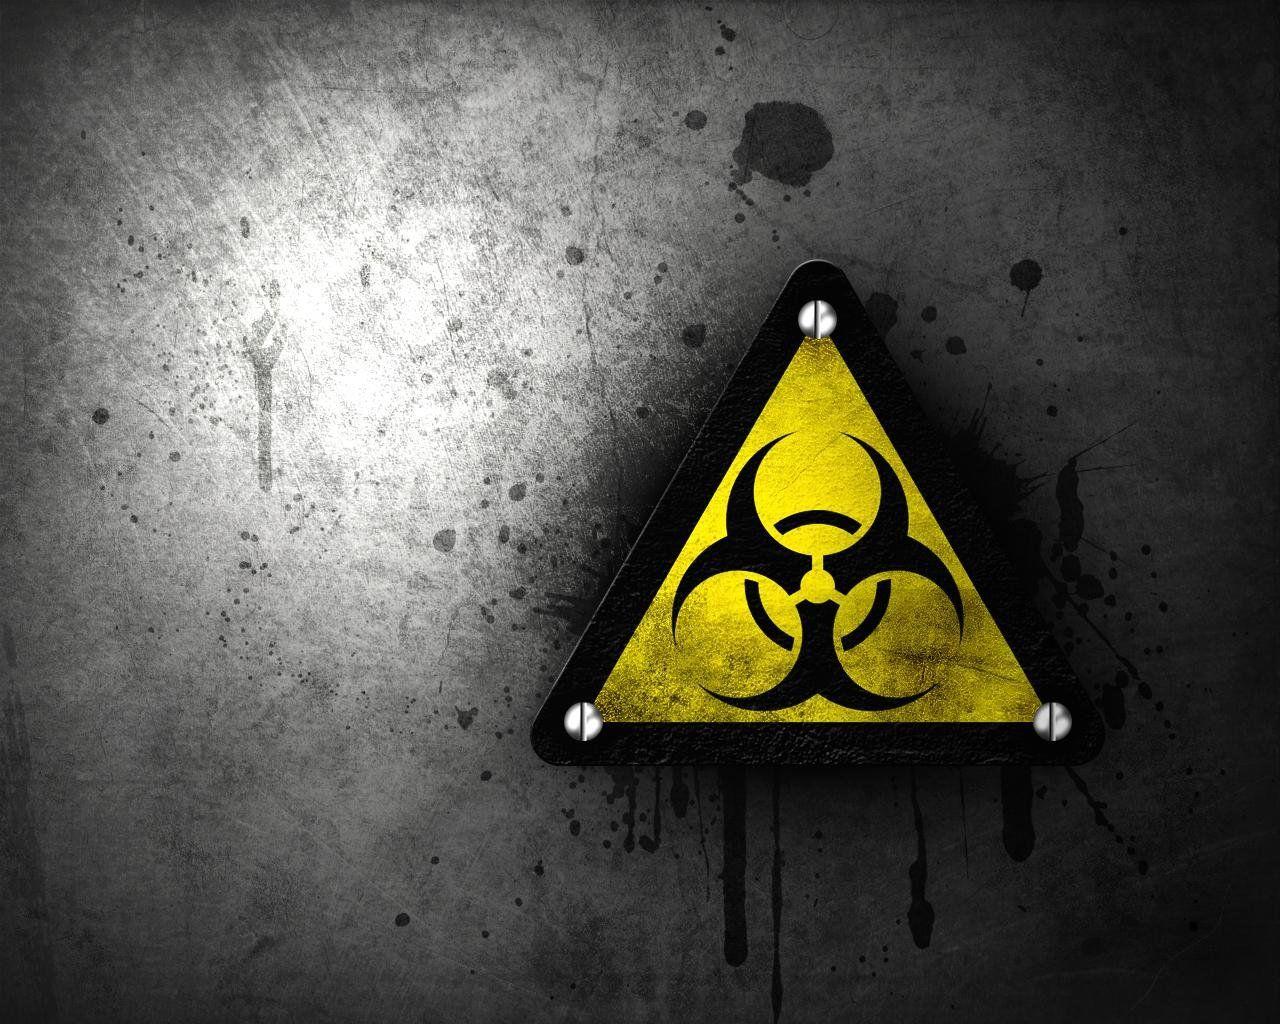 Biohazard Wallpaper, wallpaper, Biohazard Wallpapers hd wallpapers